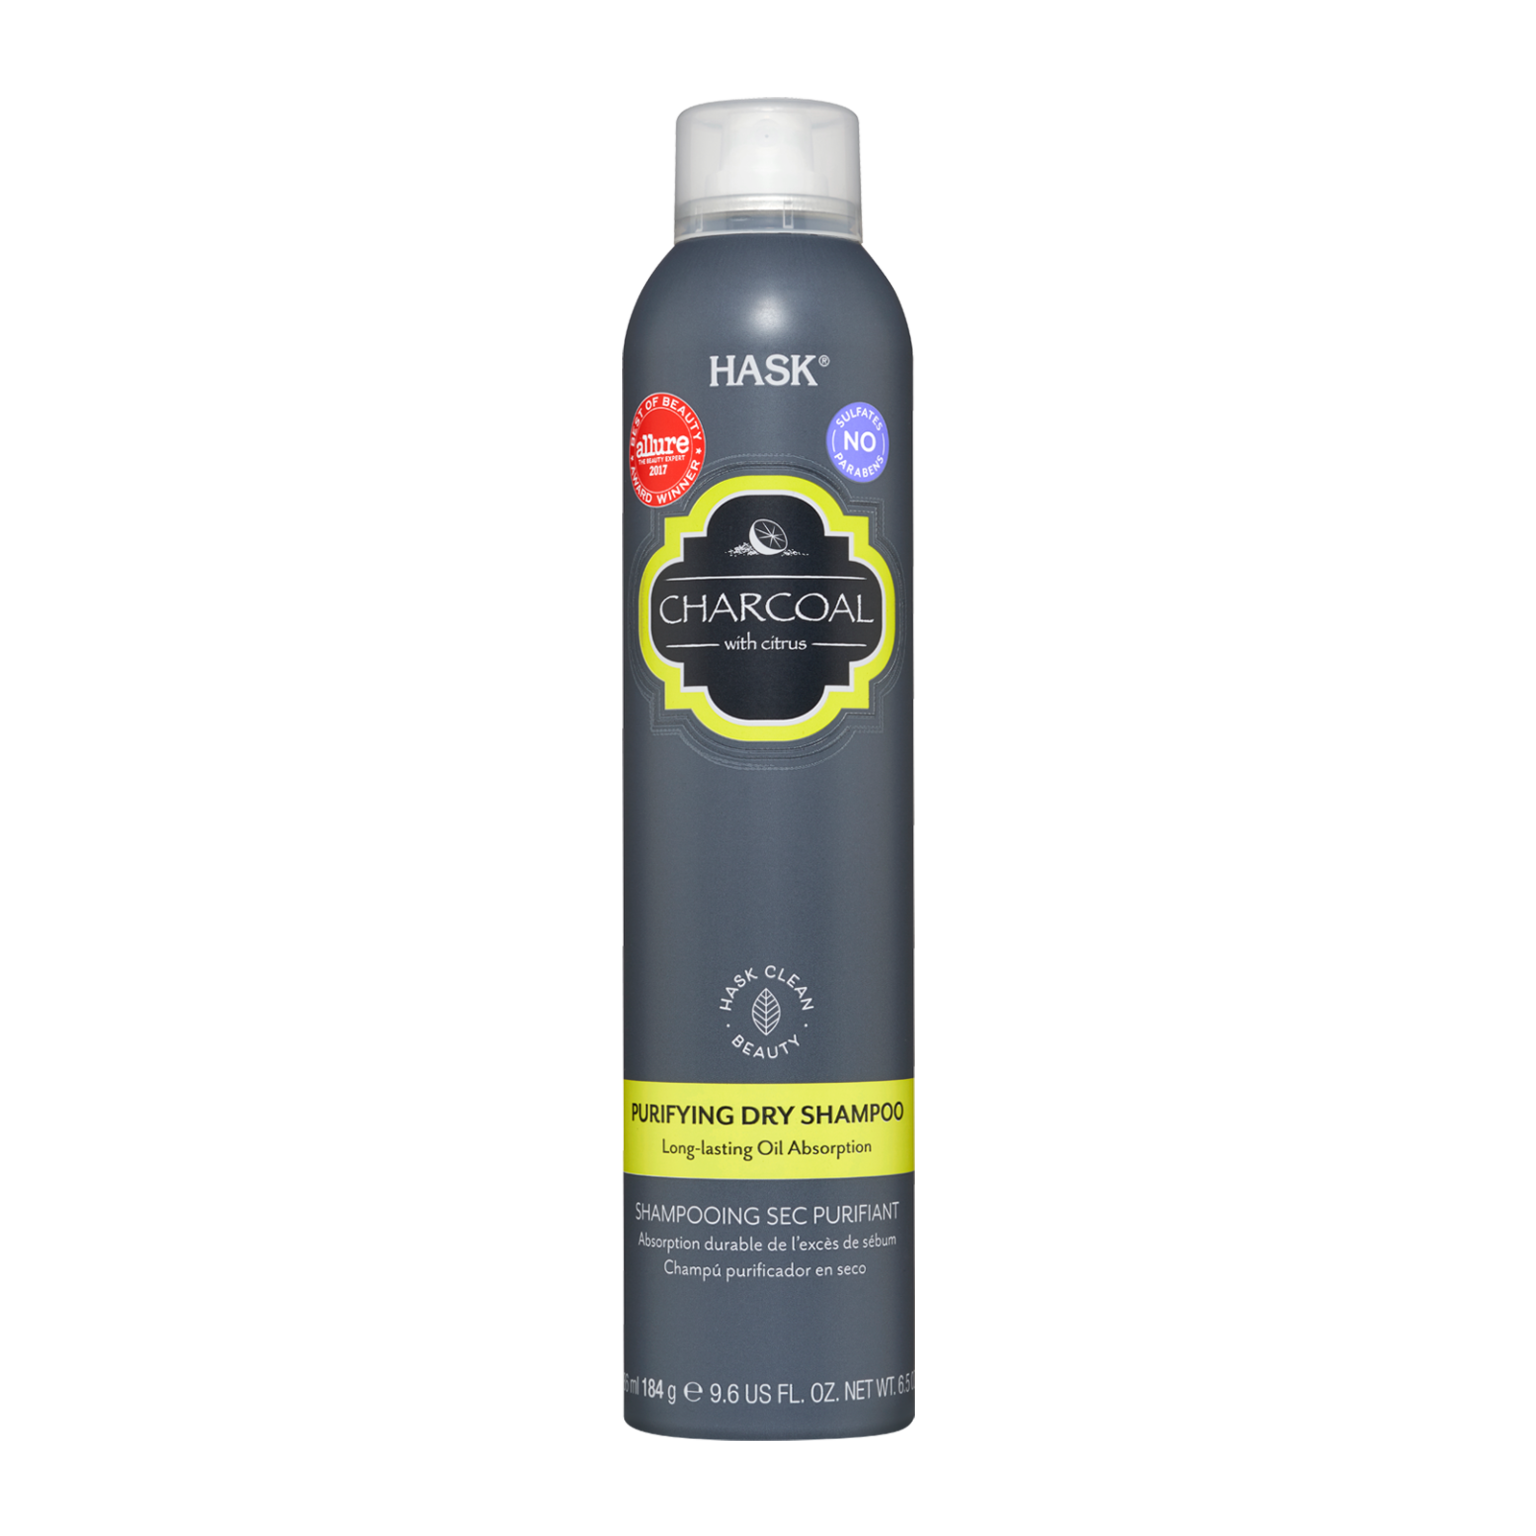 Hask Charcoal With Citrus Purifying Dry Shampoo